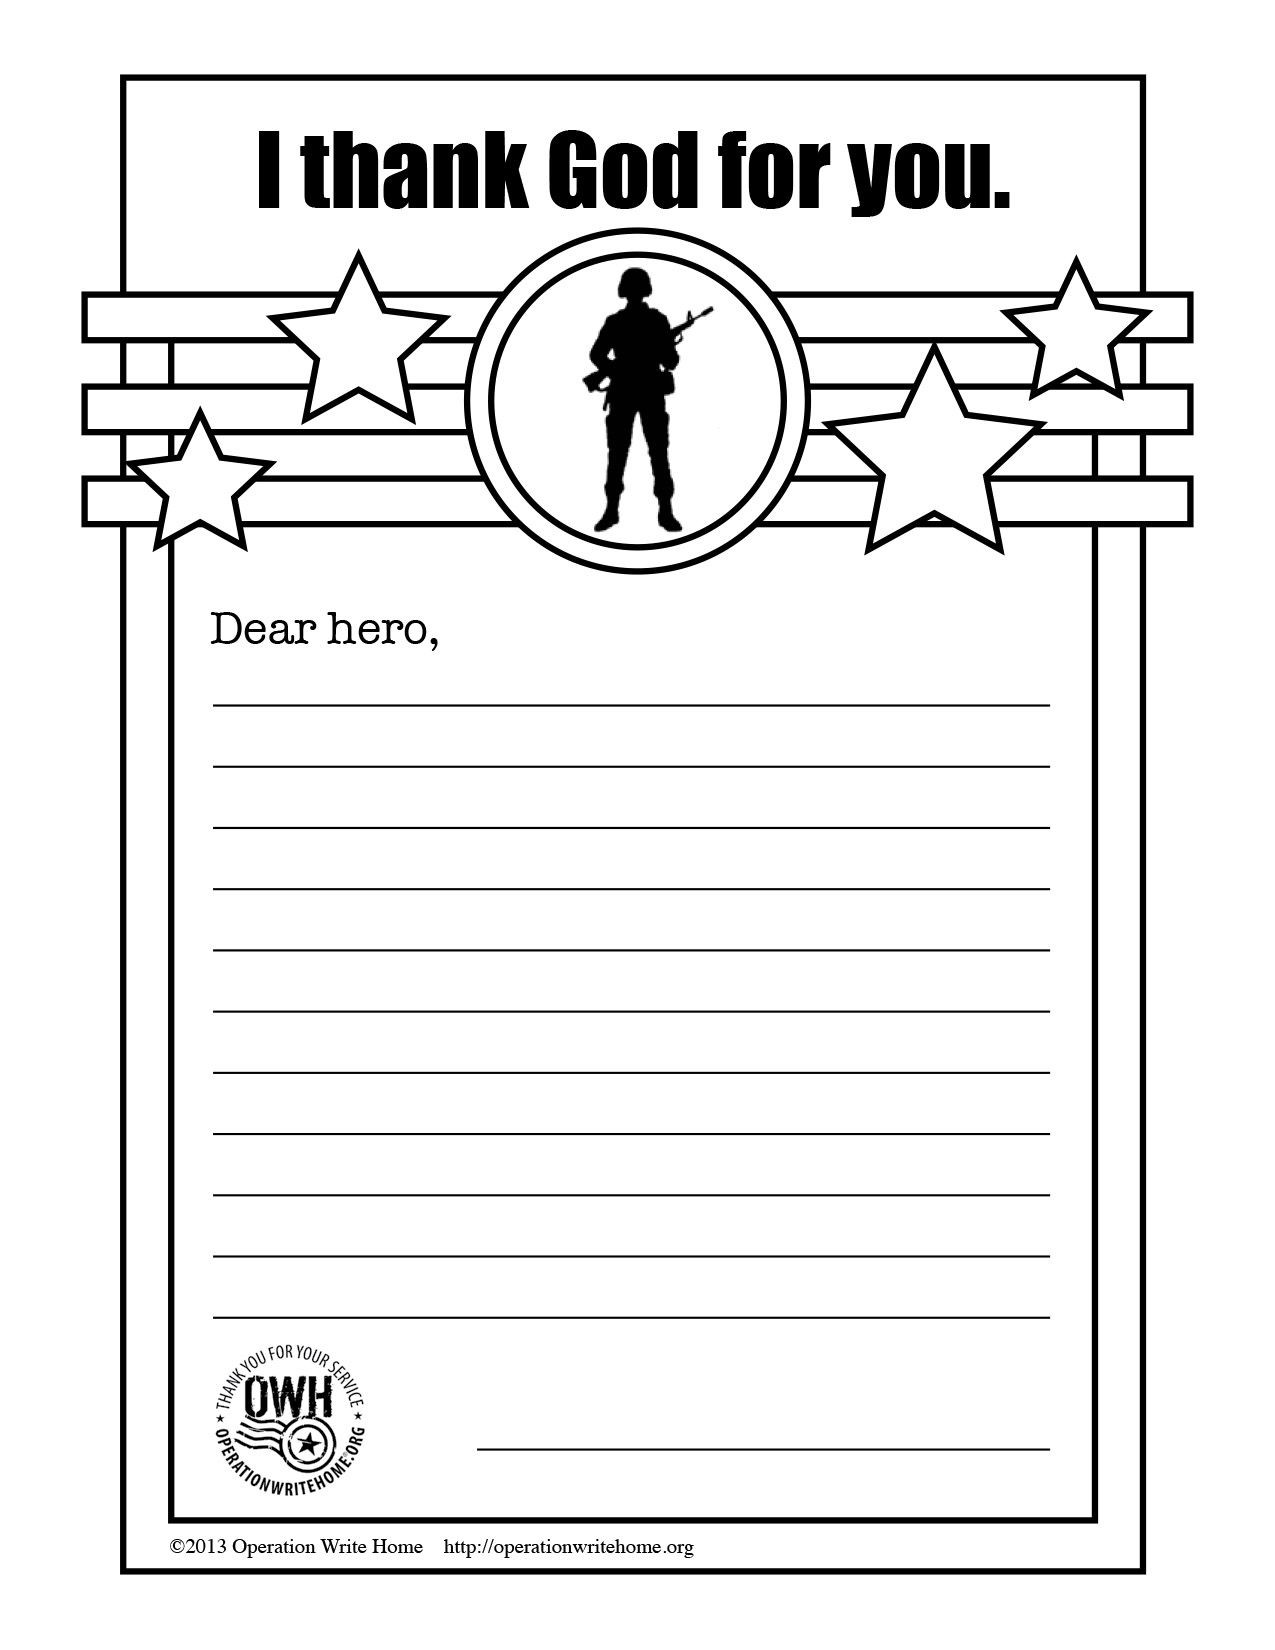 Letter to soldier Template Operation Write Home Thankgodc